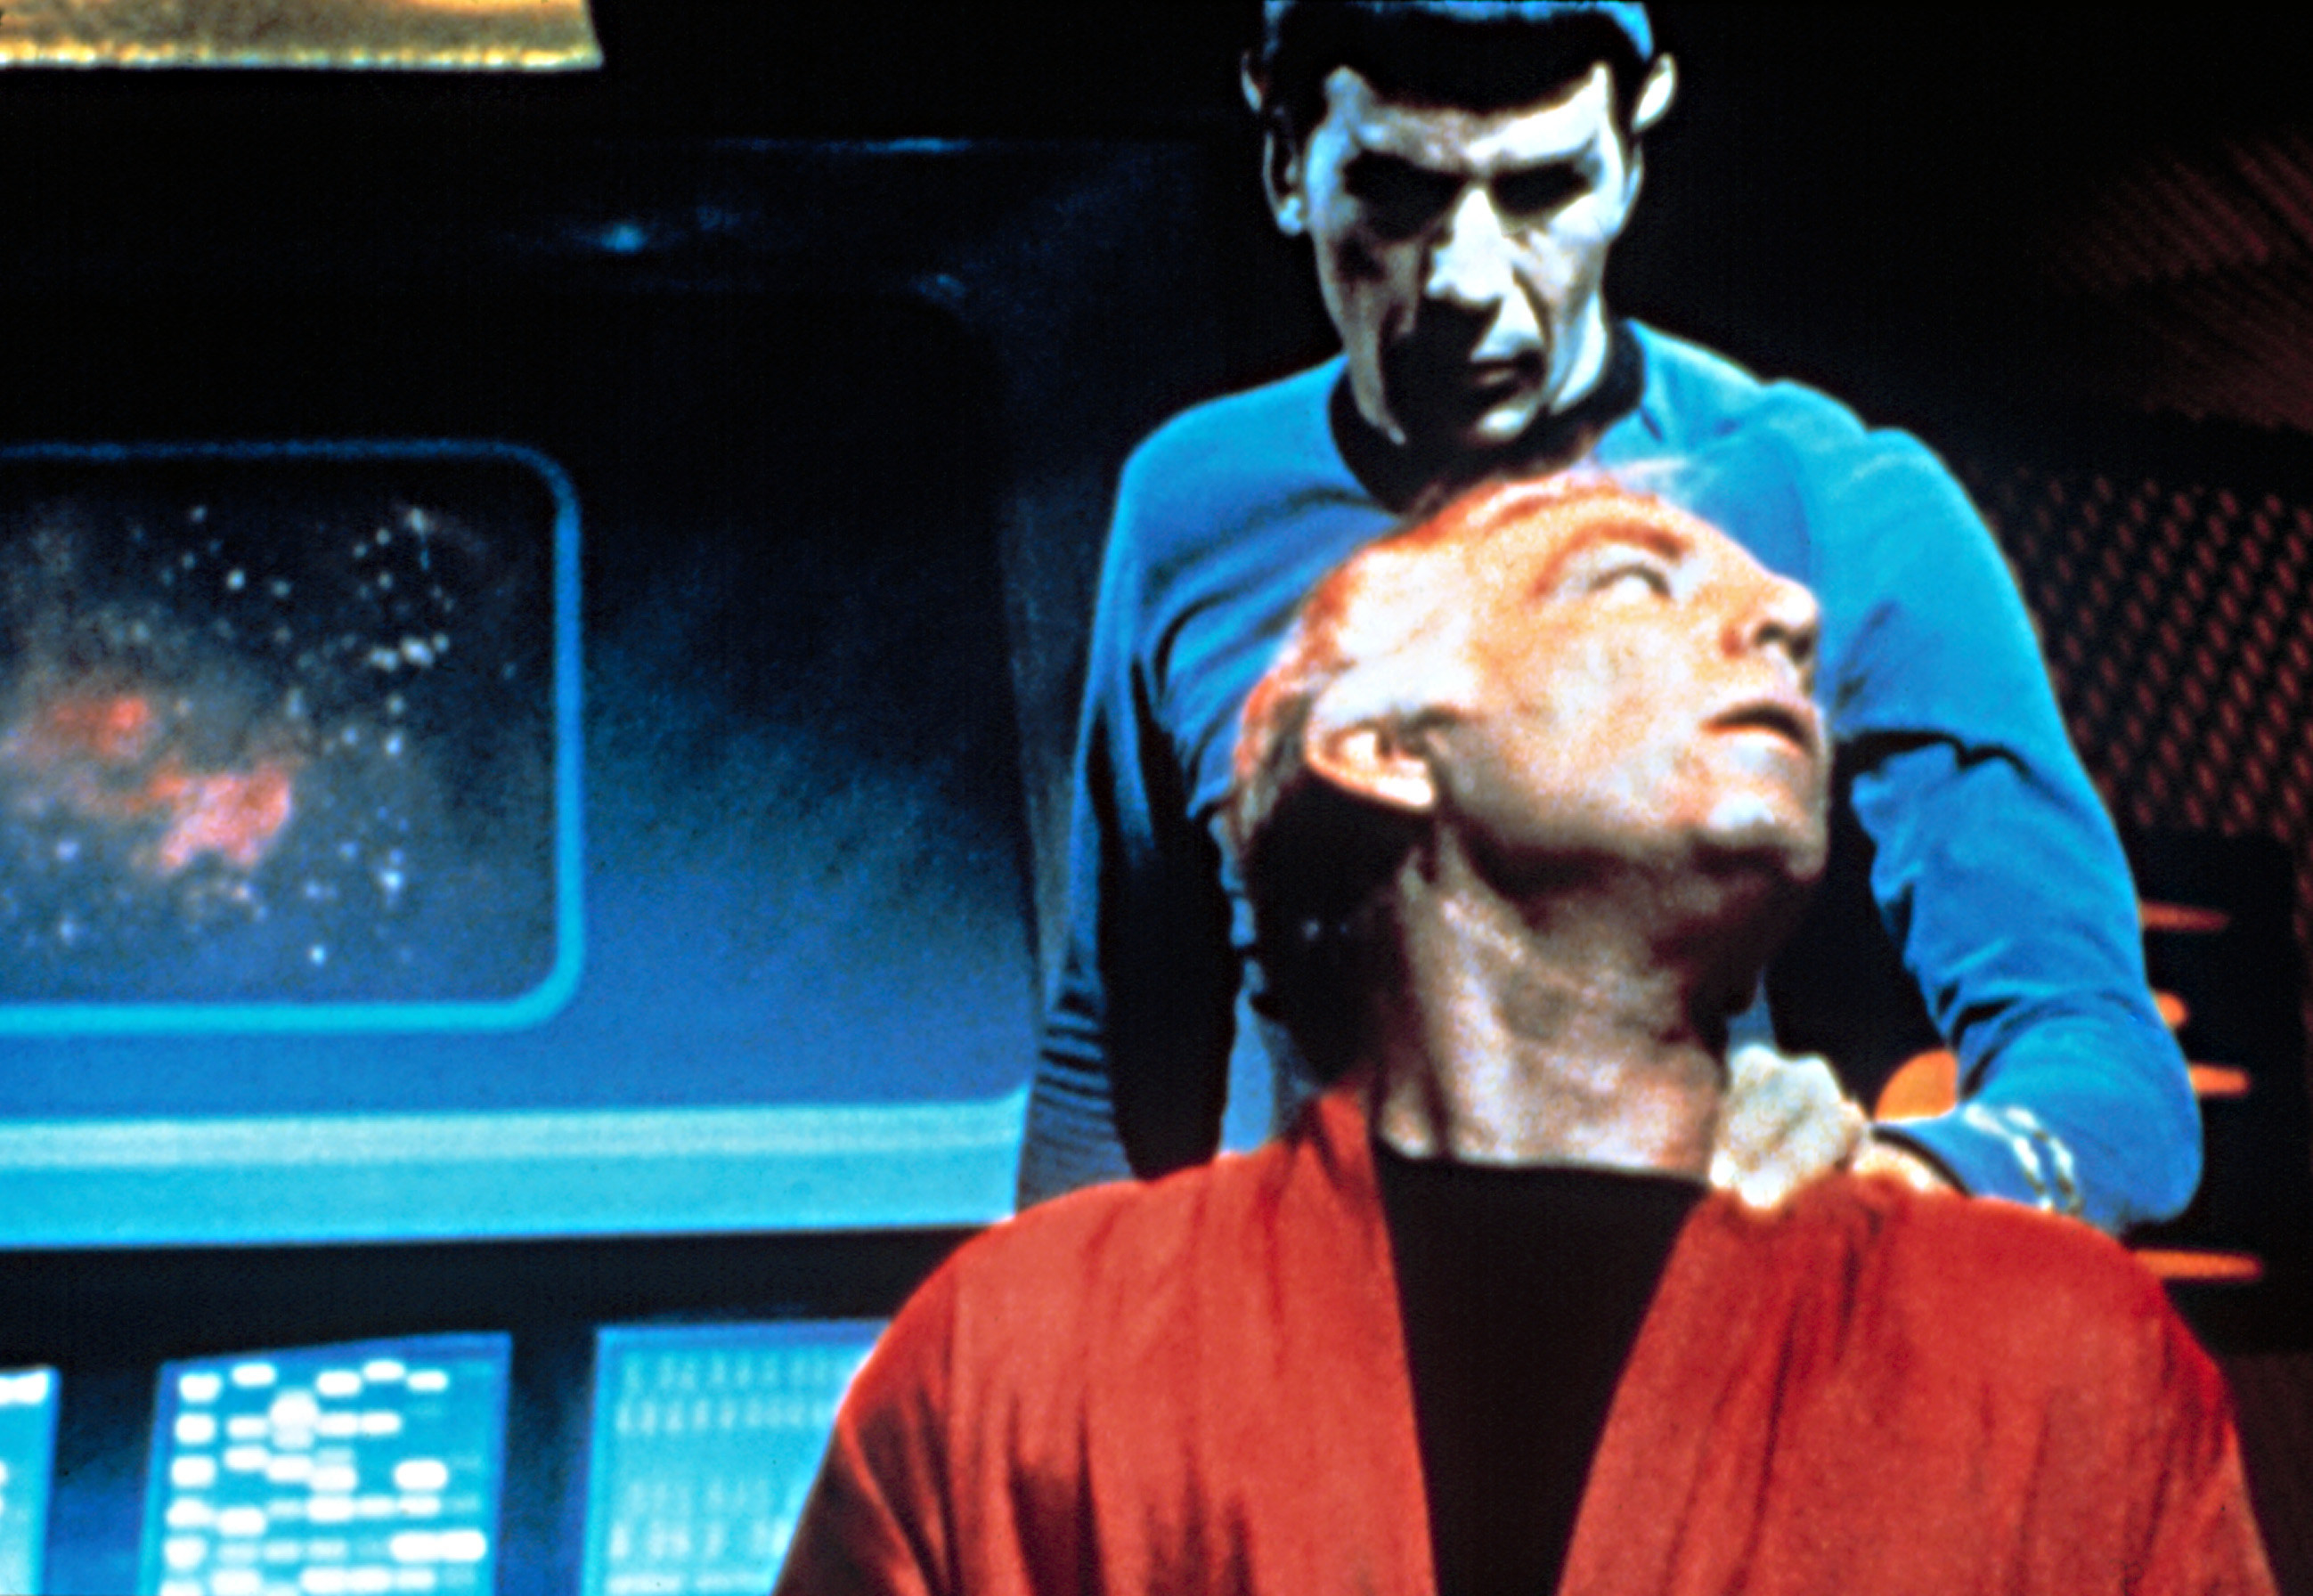 Spock administers the Vulcan nerve pinch